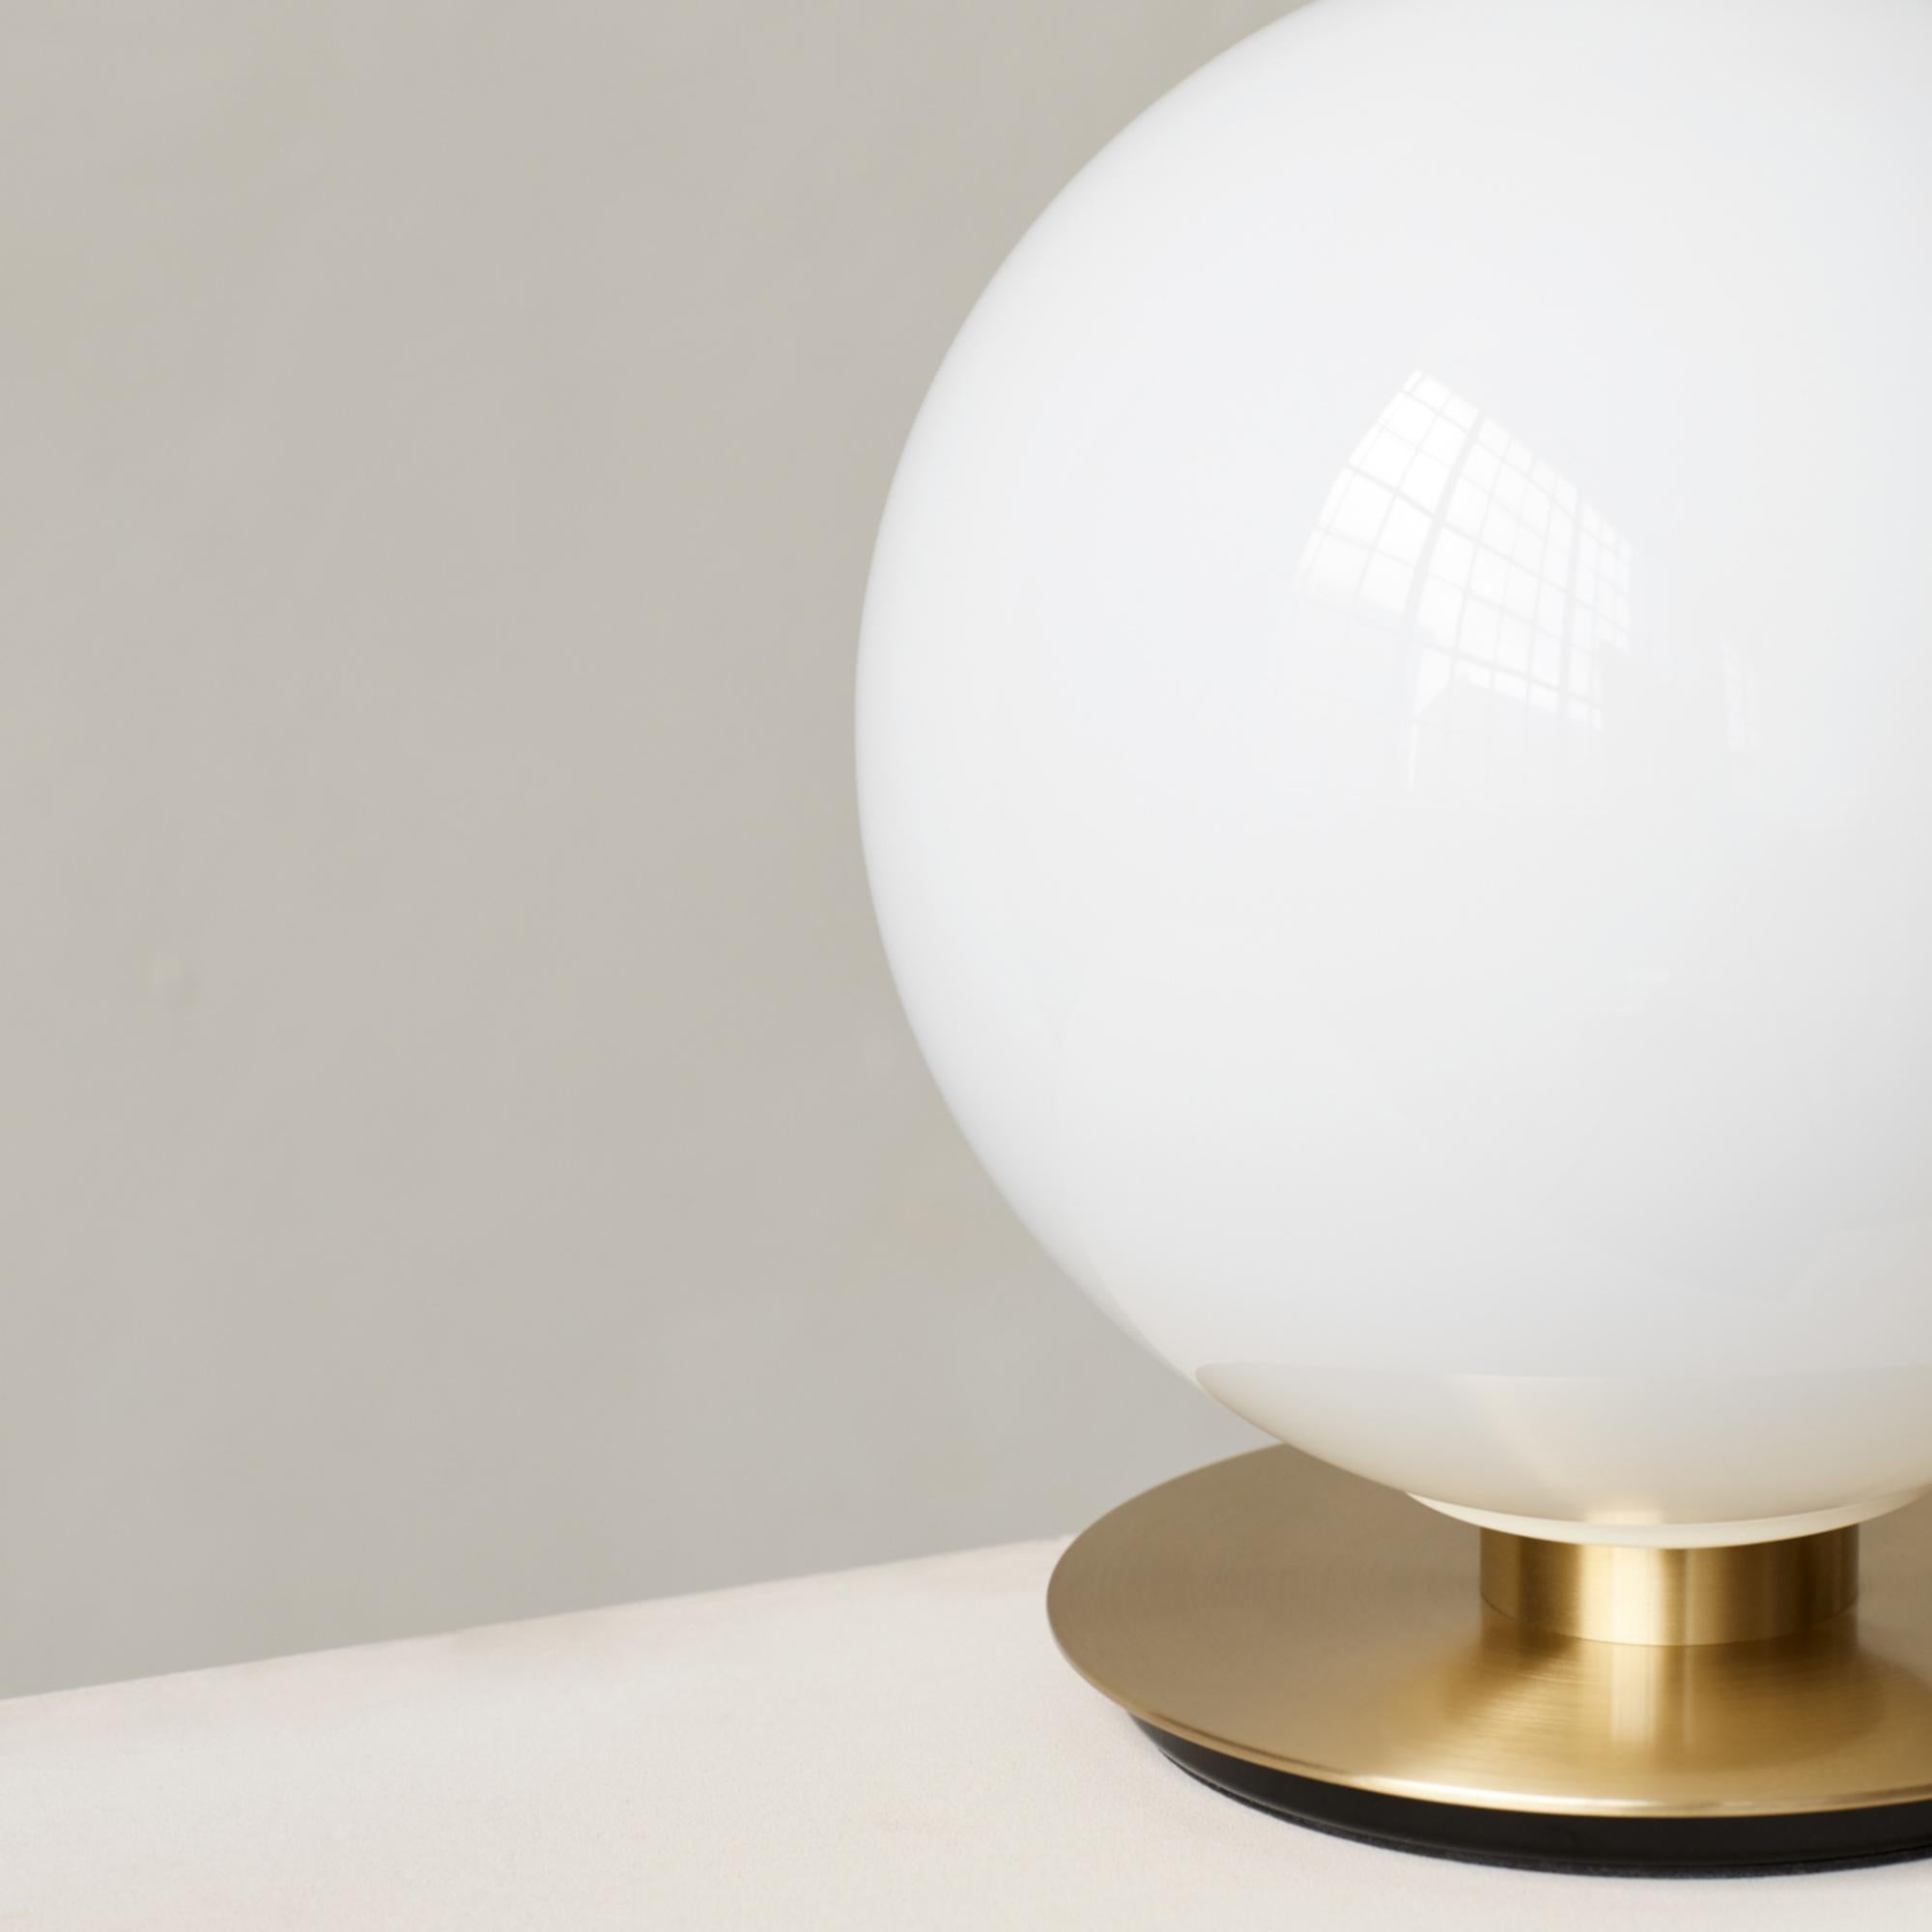 Designed for longevity, TR Bulb uses LED technology, which, with normal use, should last many years. The globe is constructed from white opal glass, and the core structure is made from aluminum to draw heat away from the LED, allowing the bulb to